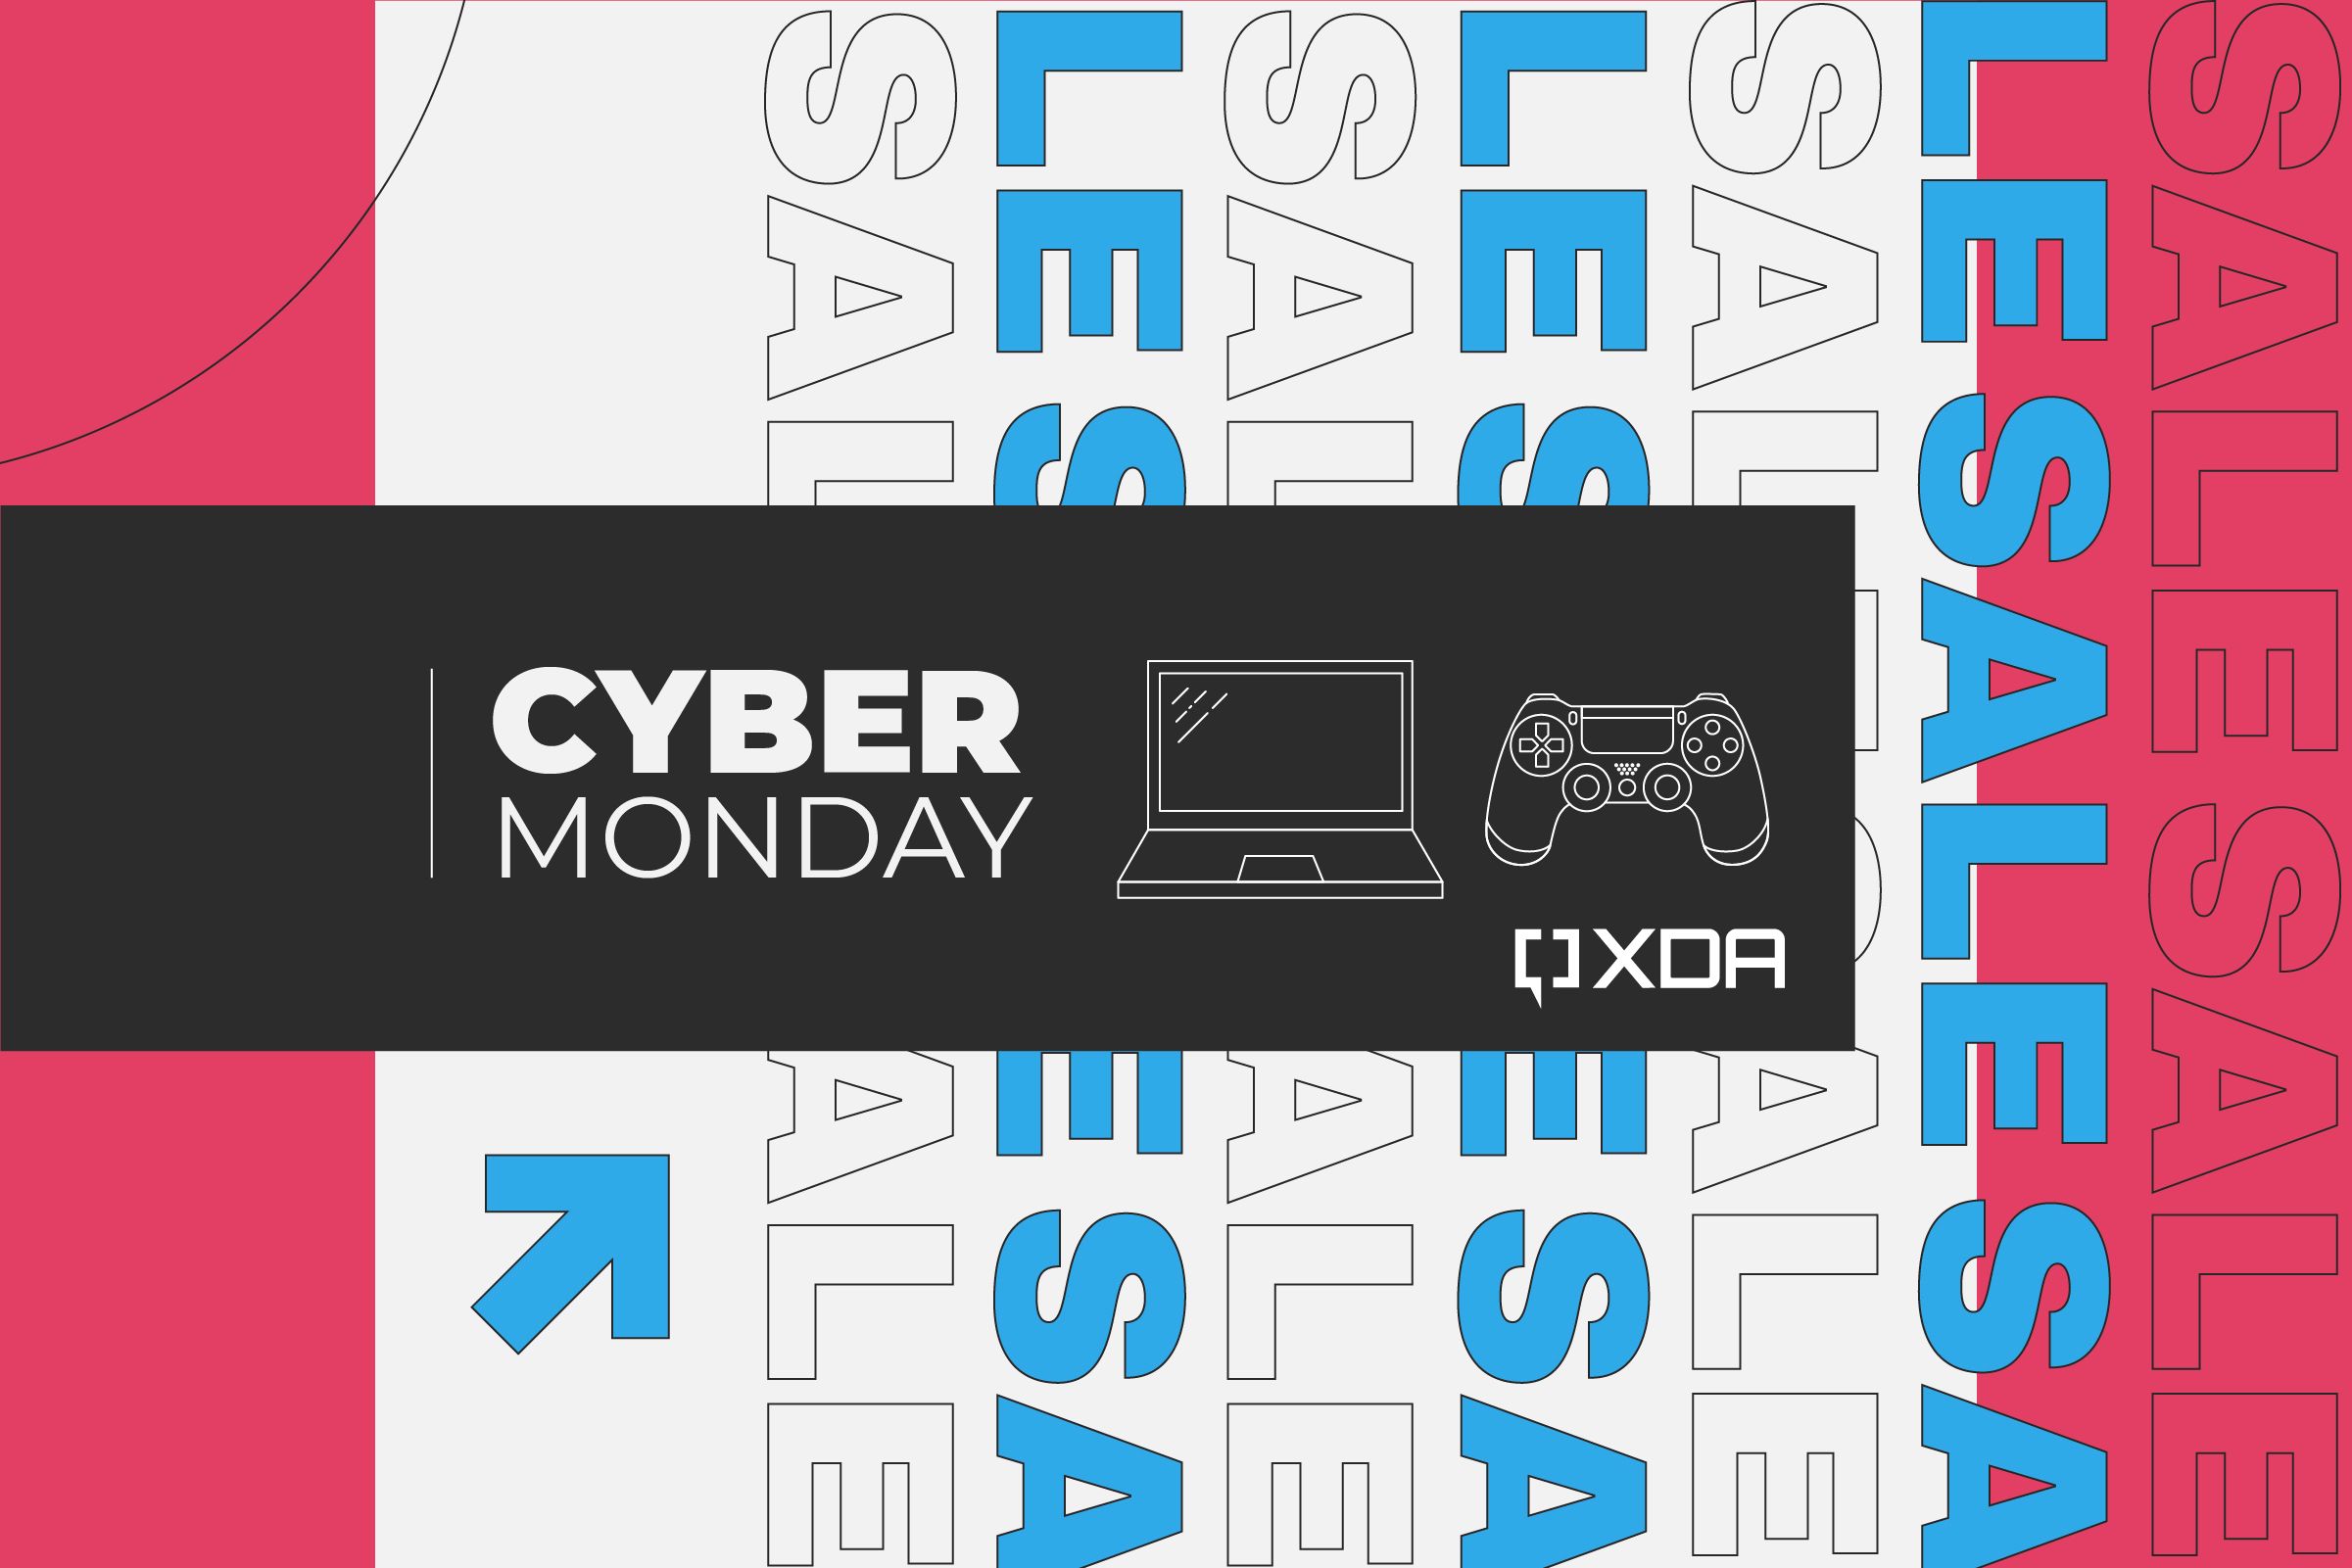 A dark grey banner with white text reading Cyber Monday next to images of a computer and a controller. The banner is placed over a white, pink, and purple background with the word 